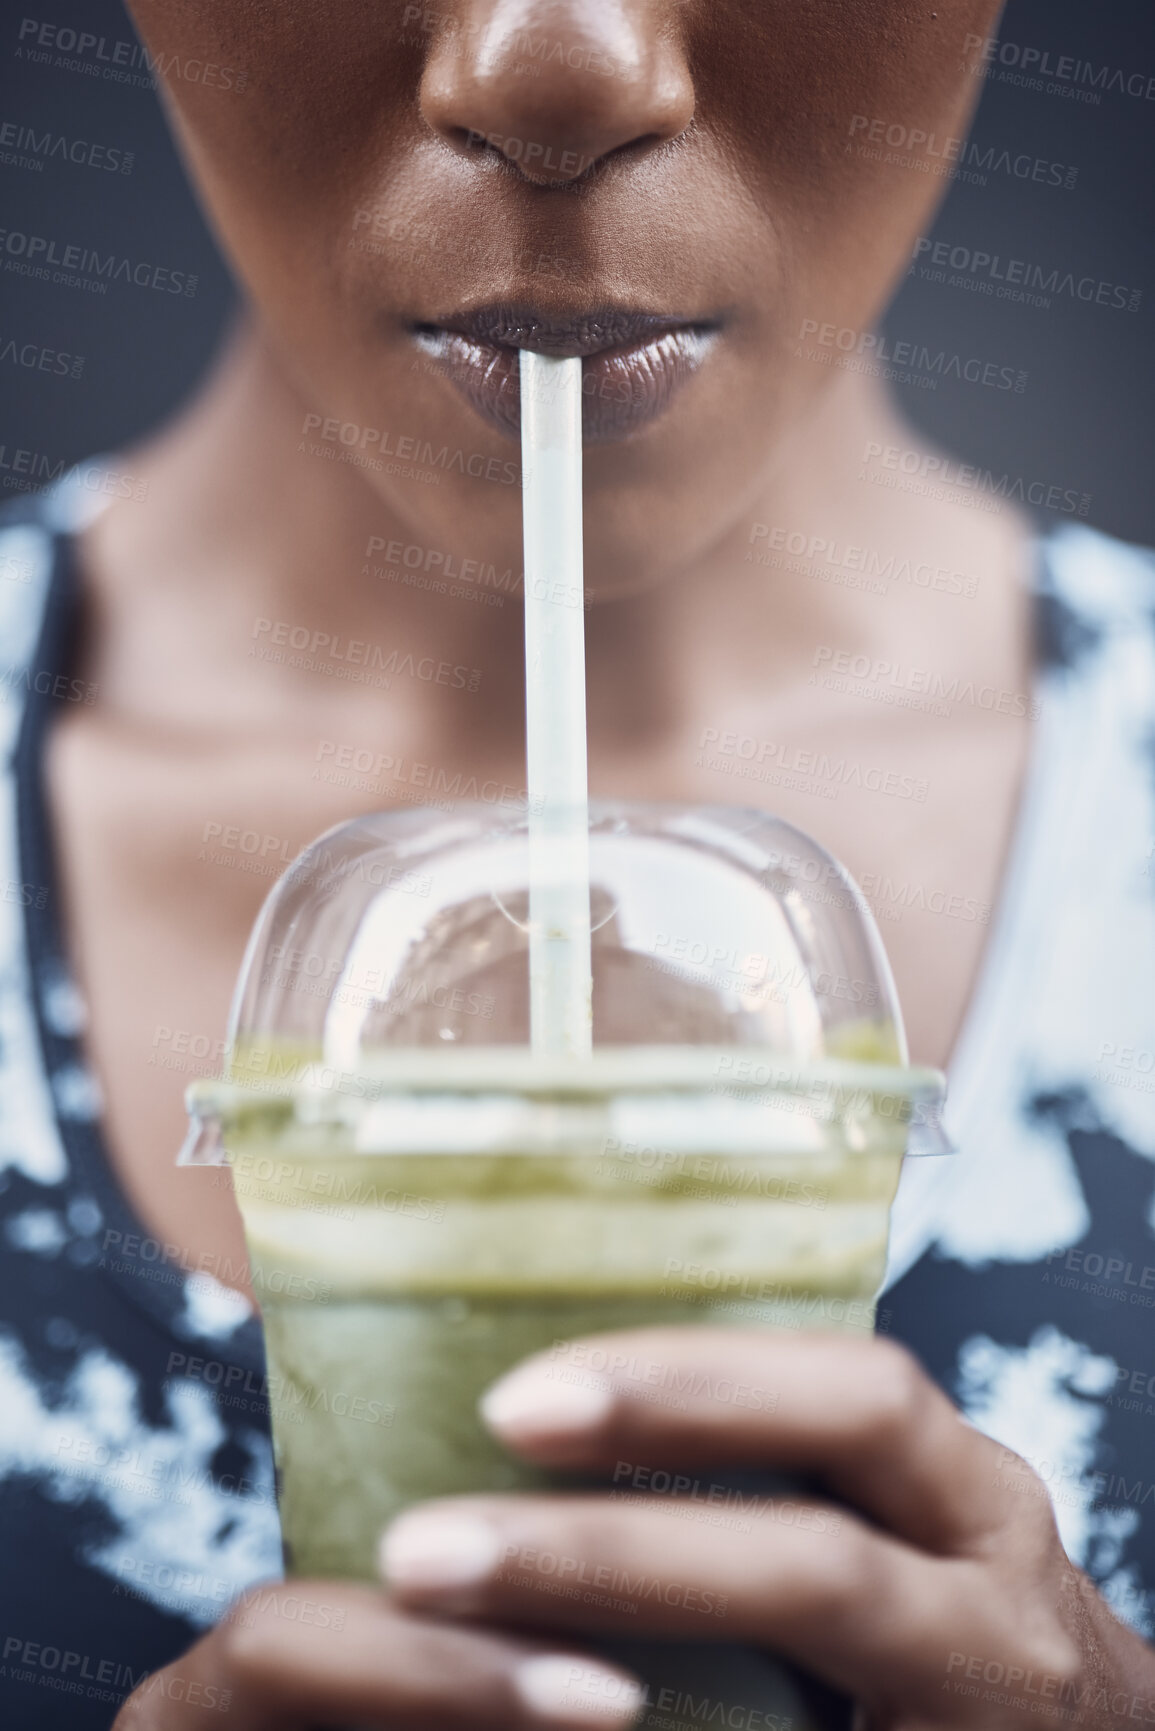 Buy stock photo Closeup of one active woman drinking a healthy green detox smoothie while exercising outdoors. Female athlete sipping on fresh fruit juice with straw in plastic cup to cleanse and provide energy for training. Wholesome drink with vitamins and nutrients